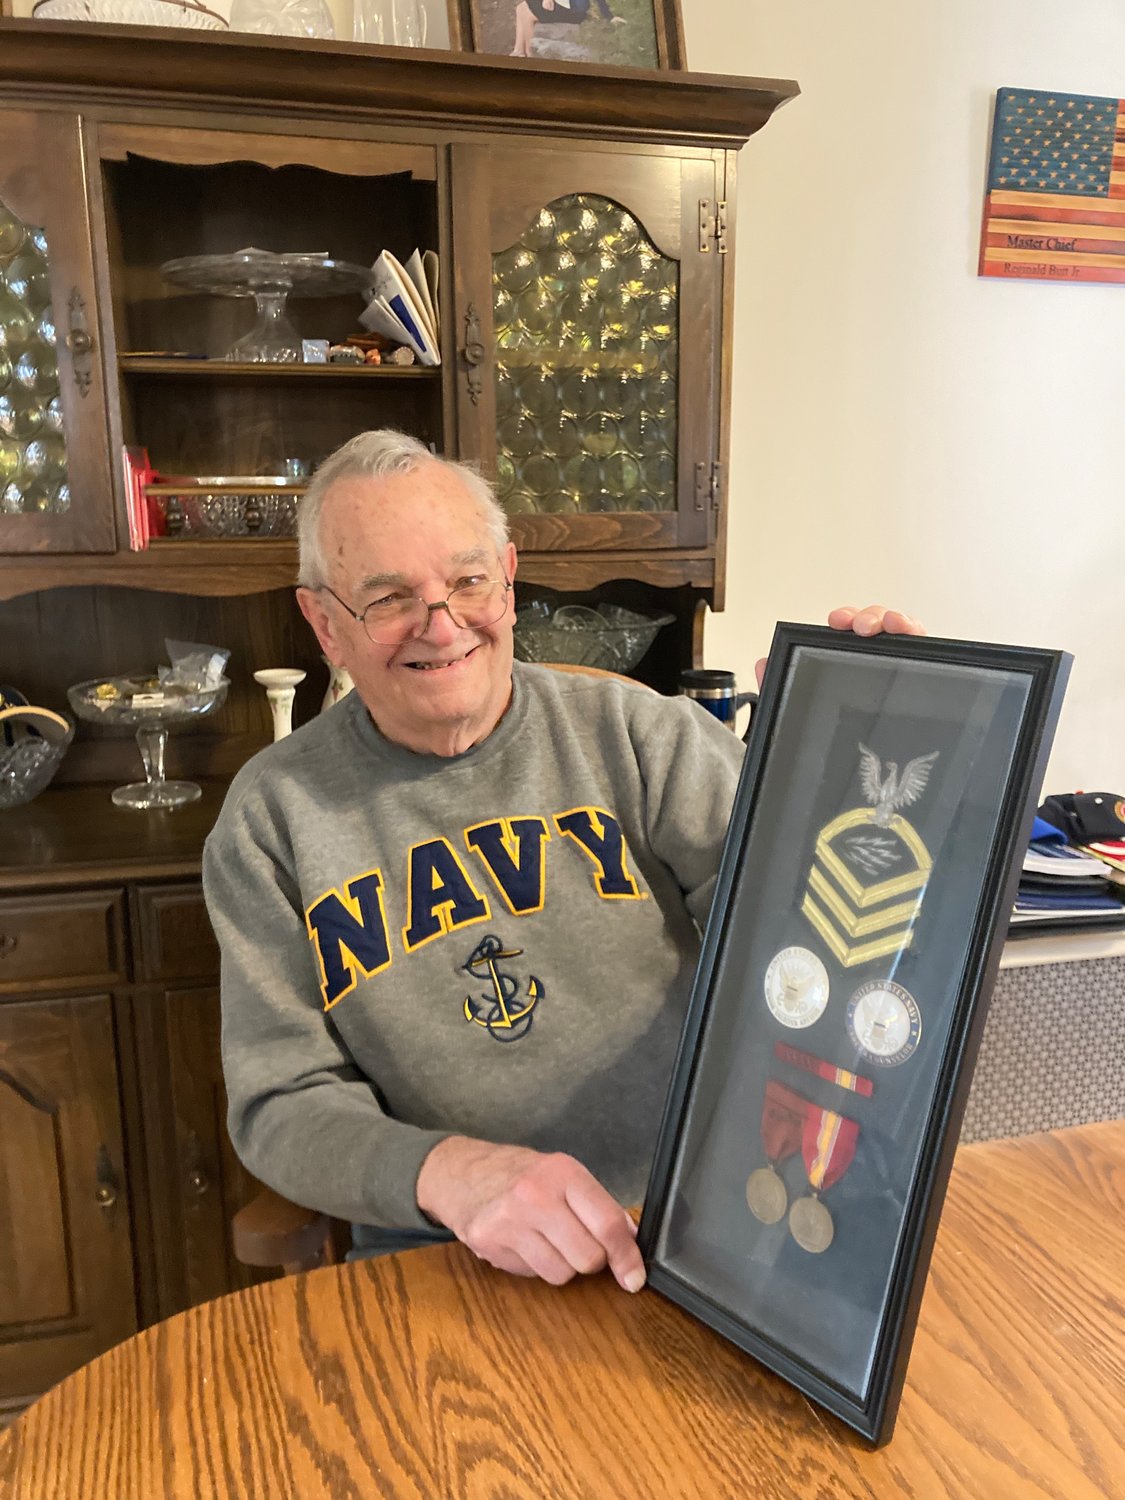 Reginald Butt, who was a chief radio operator in the Navy, received medals for his service. He is the commander of Oyster Bay’s American Legion.